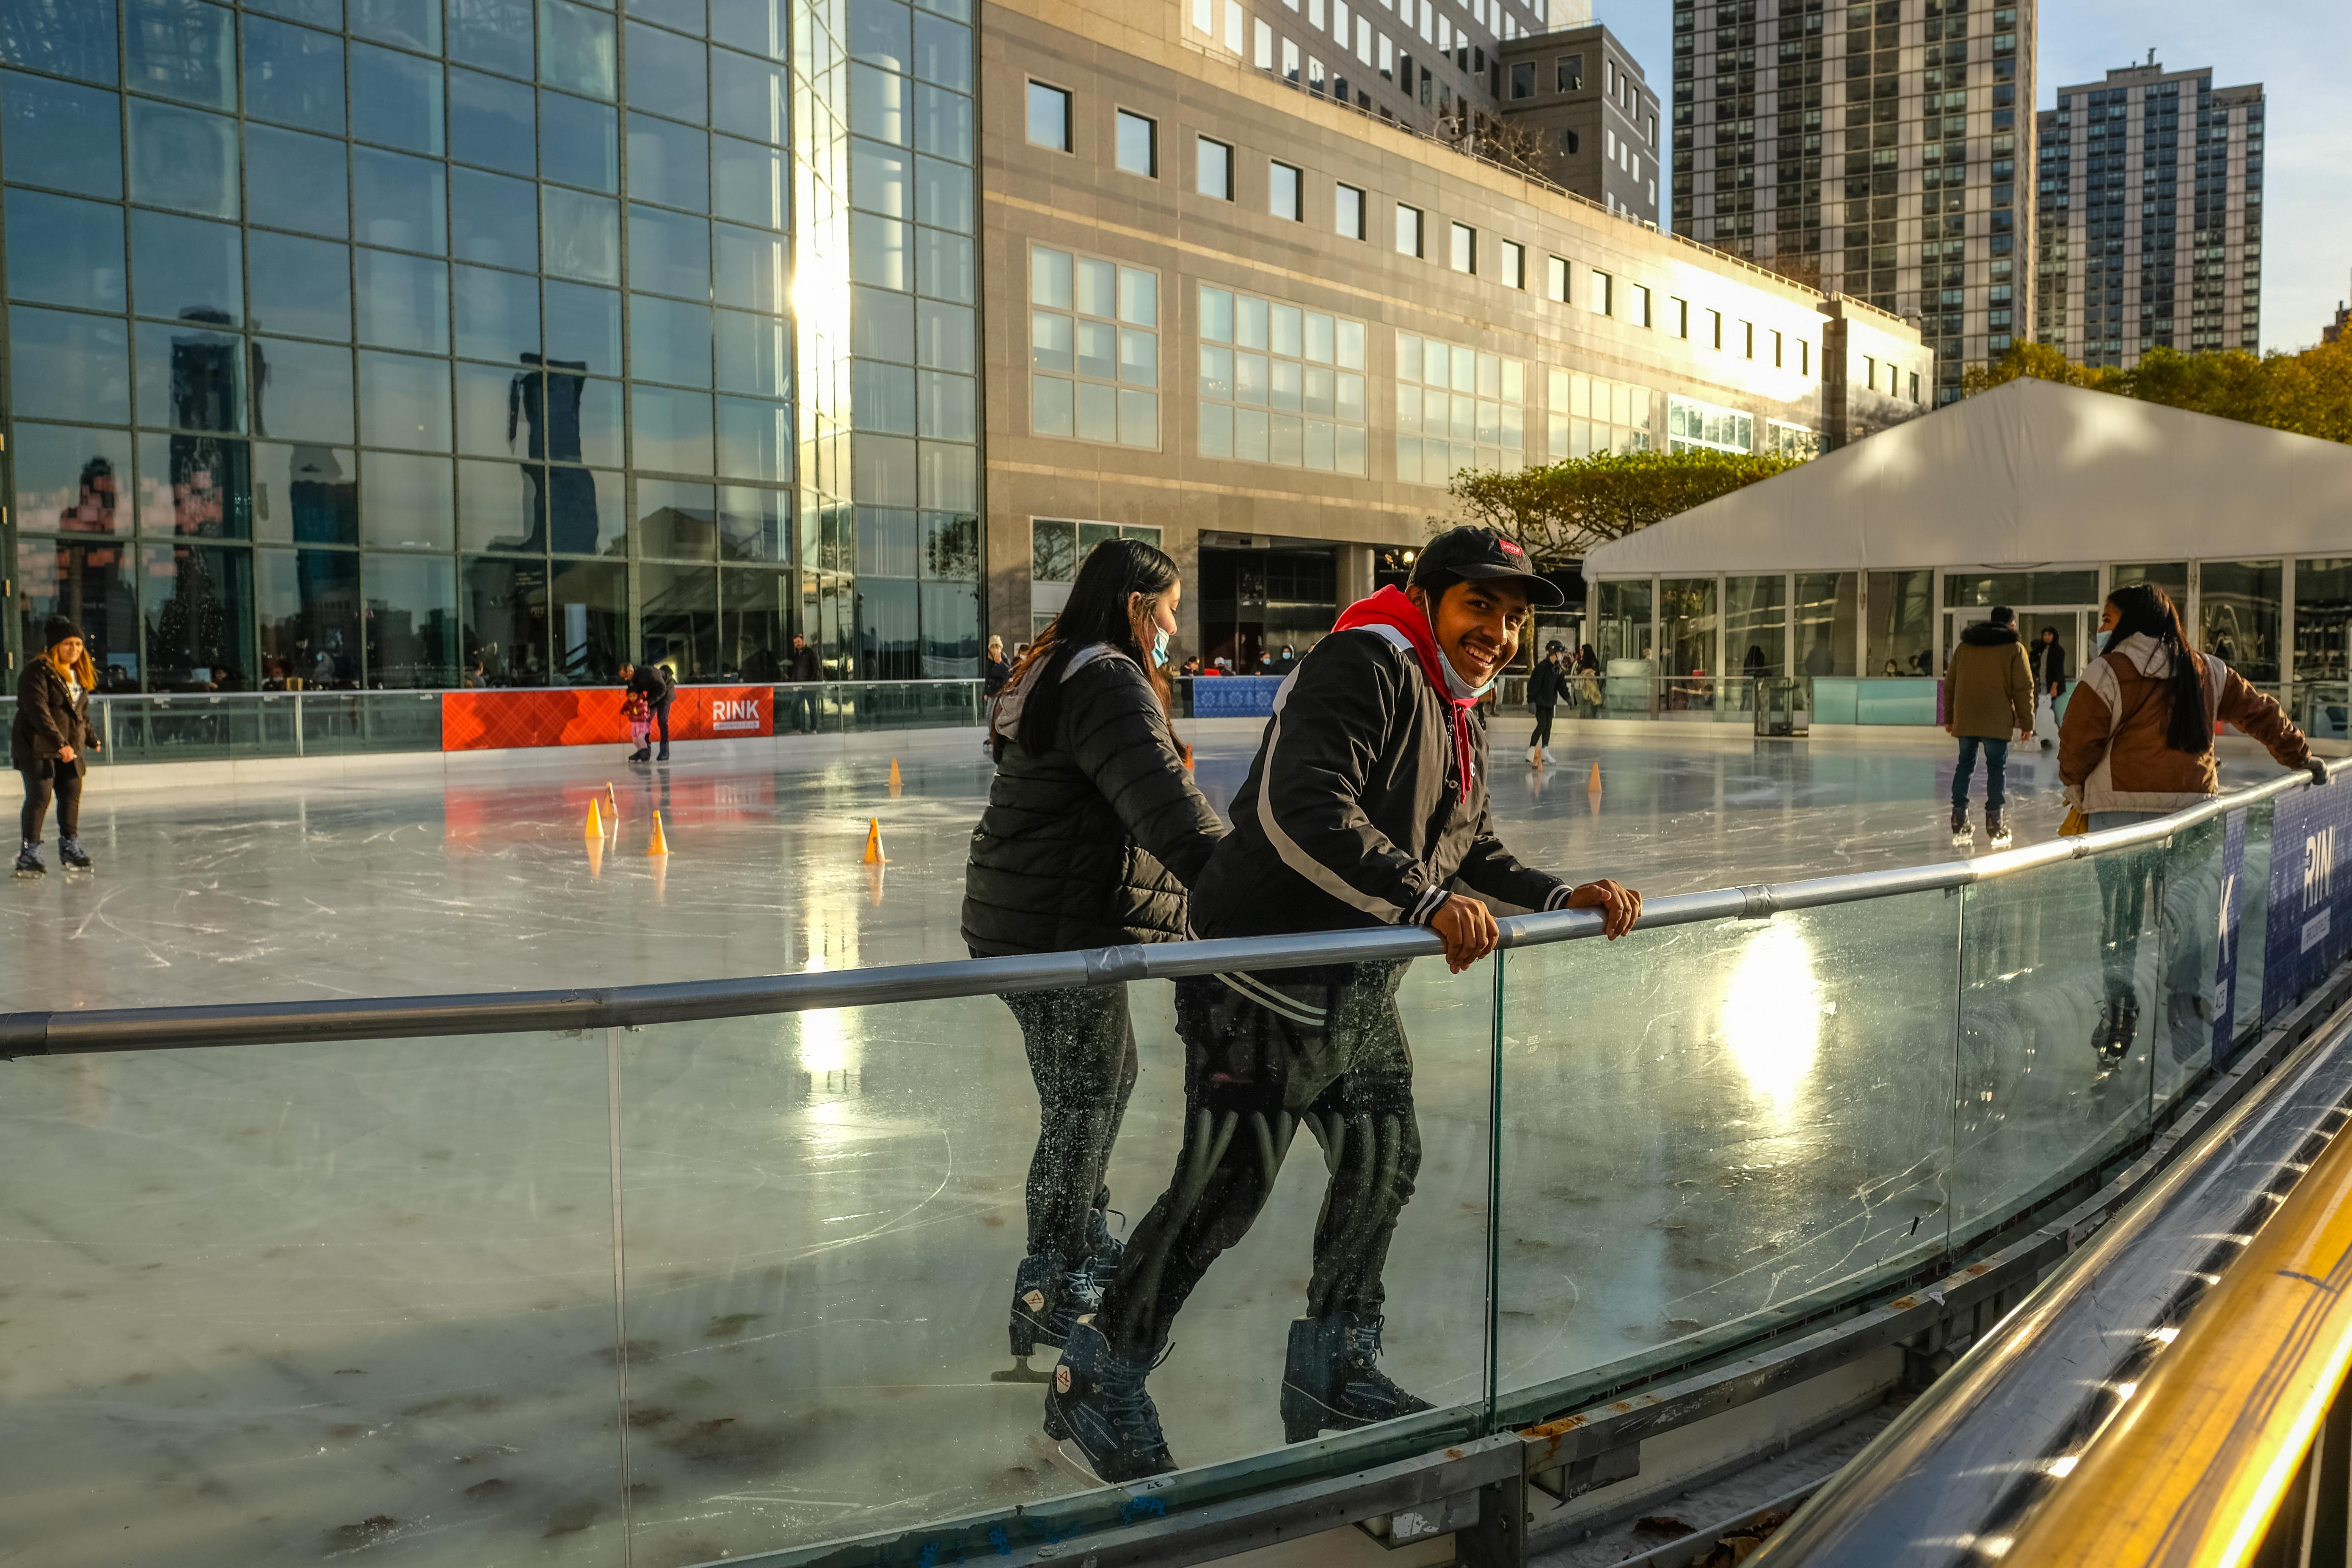 Ice Skating Rinks : The Rink at Bryant Park : NYC Parks